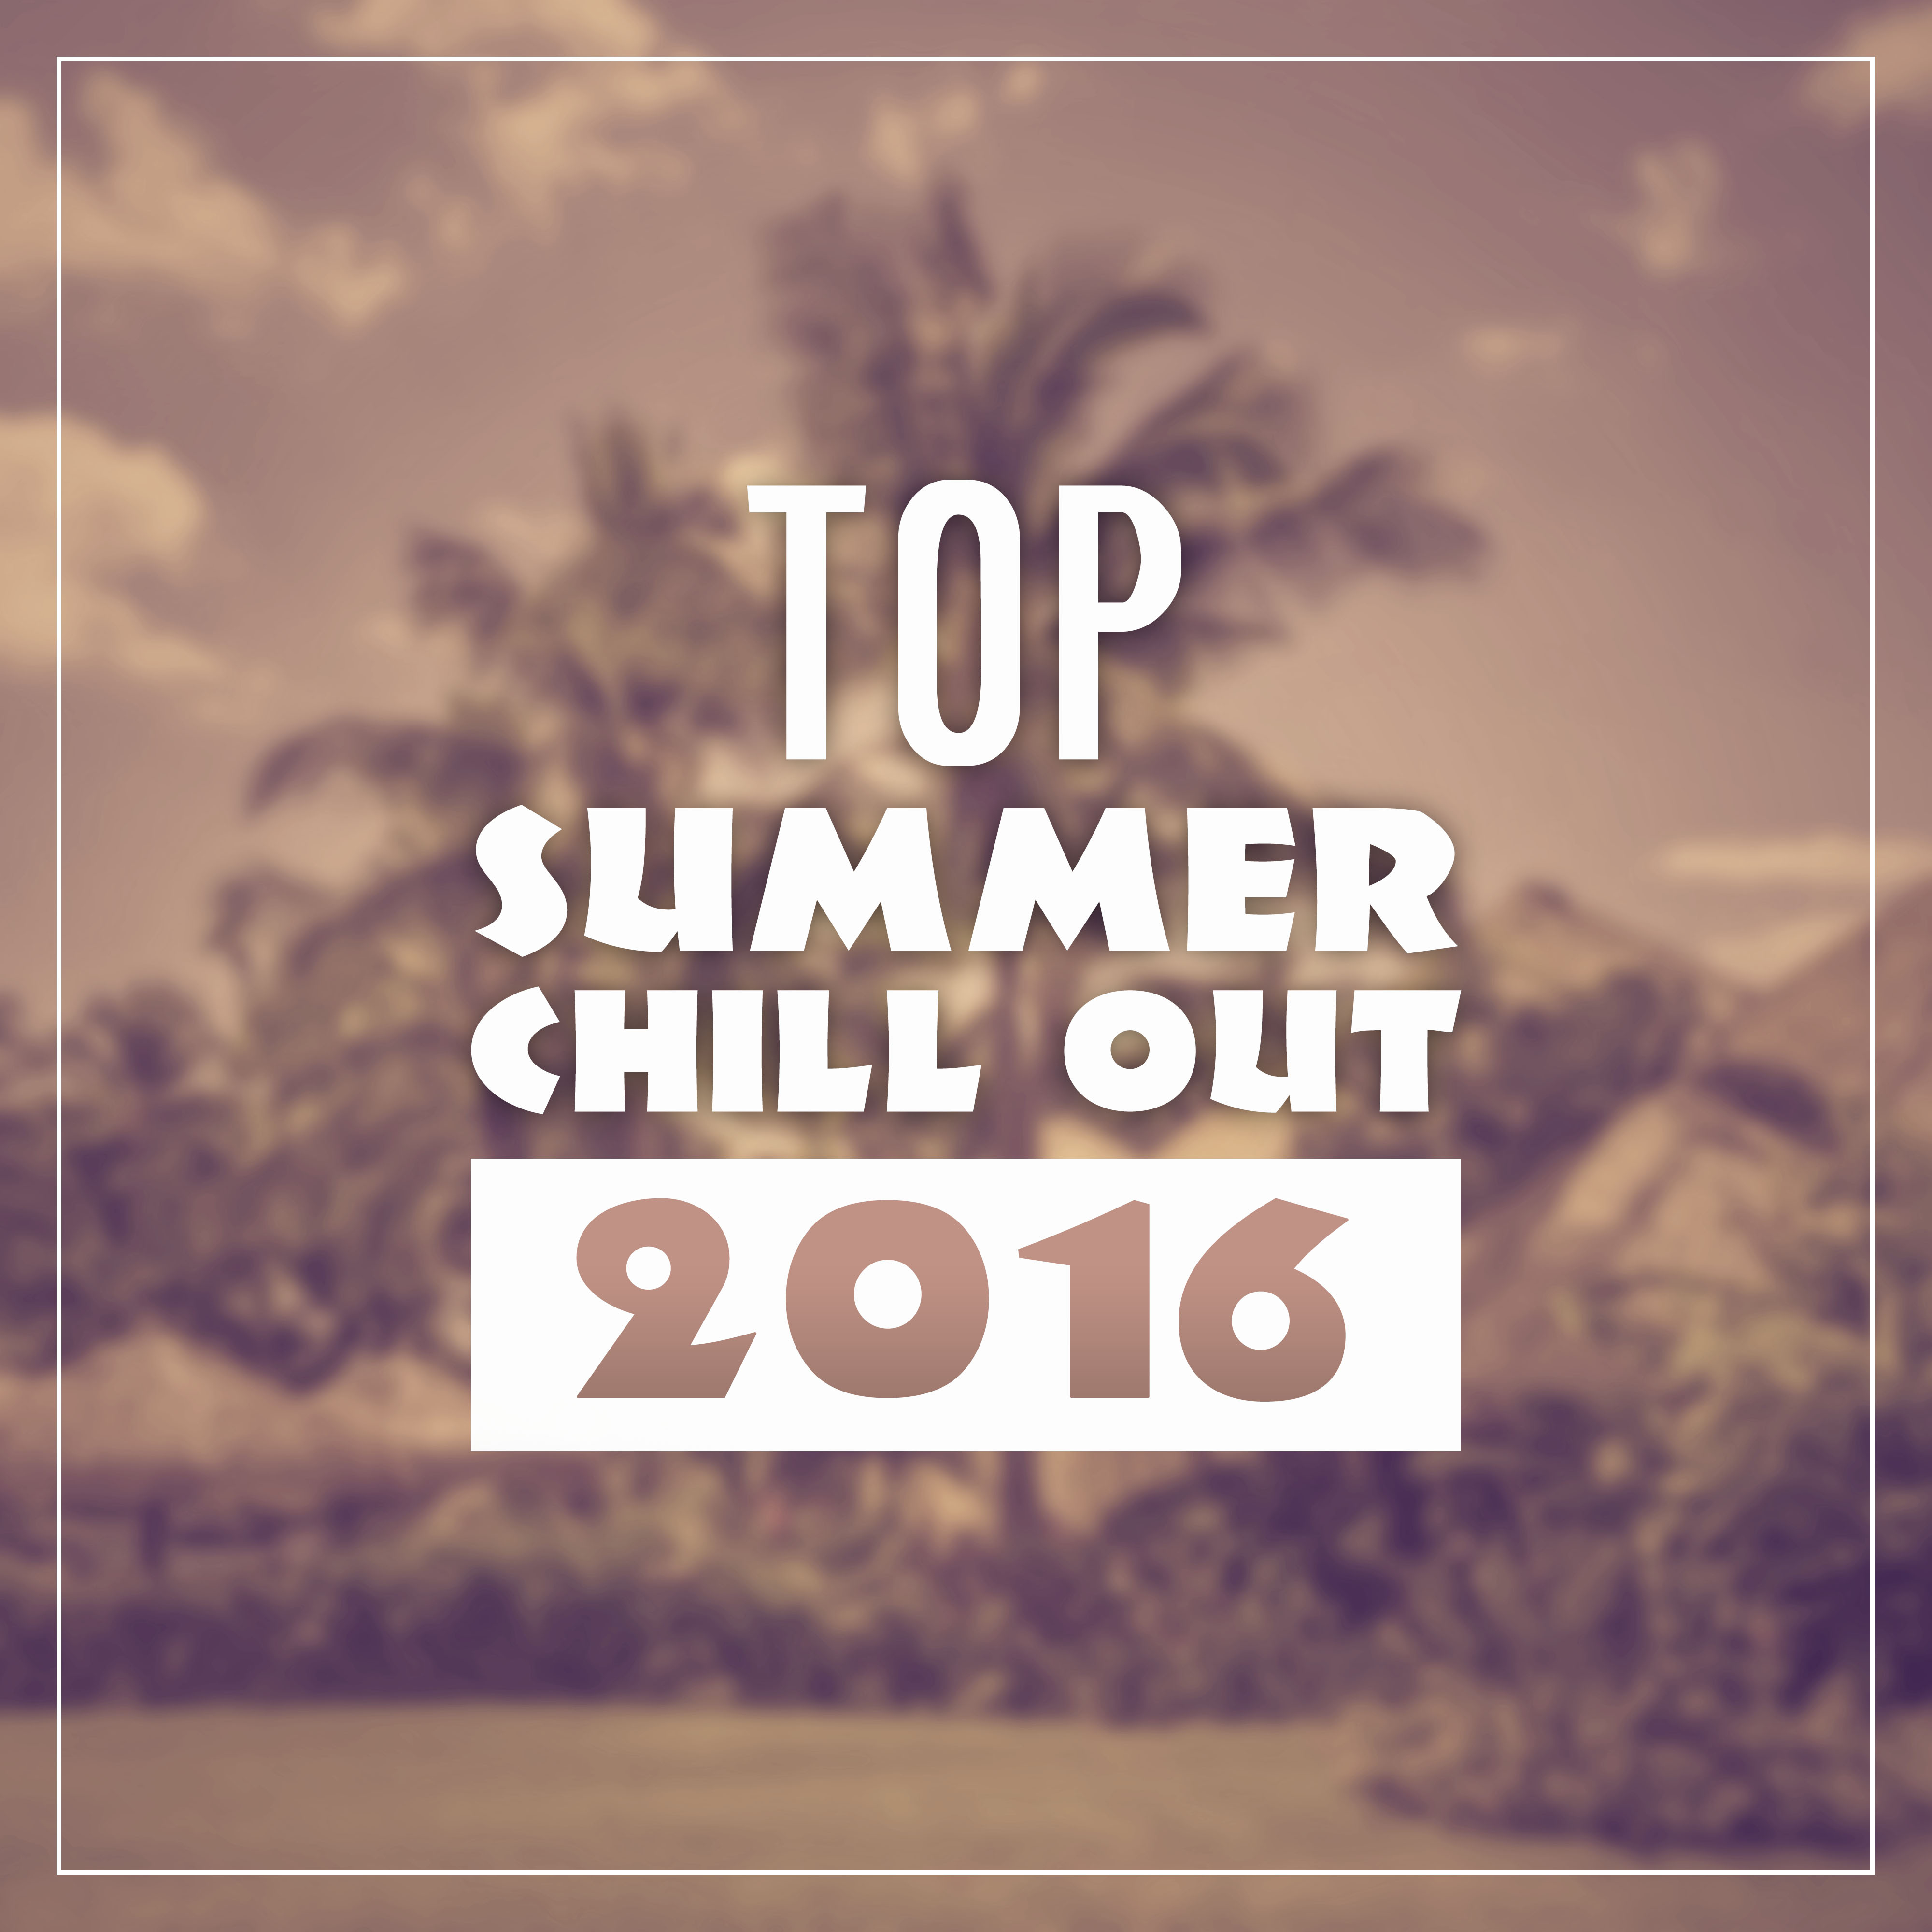 Top Summer Chill Out 2016  Best Chill Out Collection, Bar Lounge, Summer Music, Bossa Lounge, Ambient Music, Take a Rest